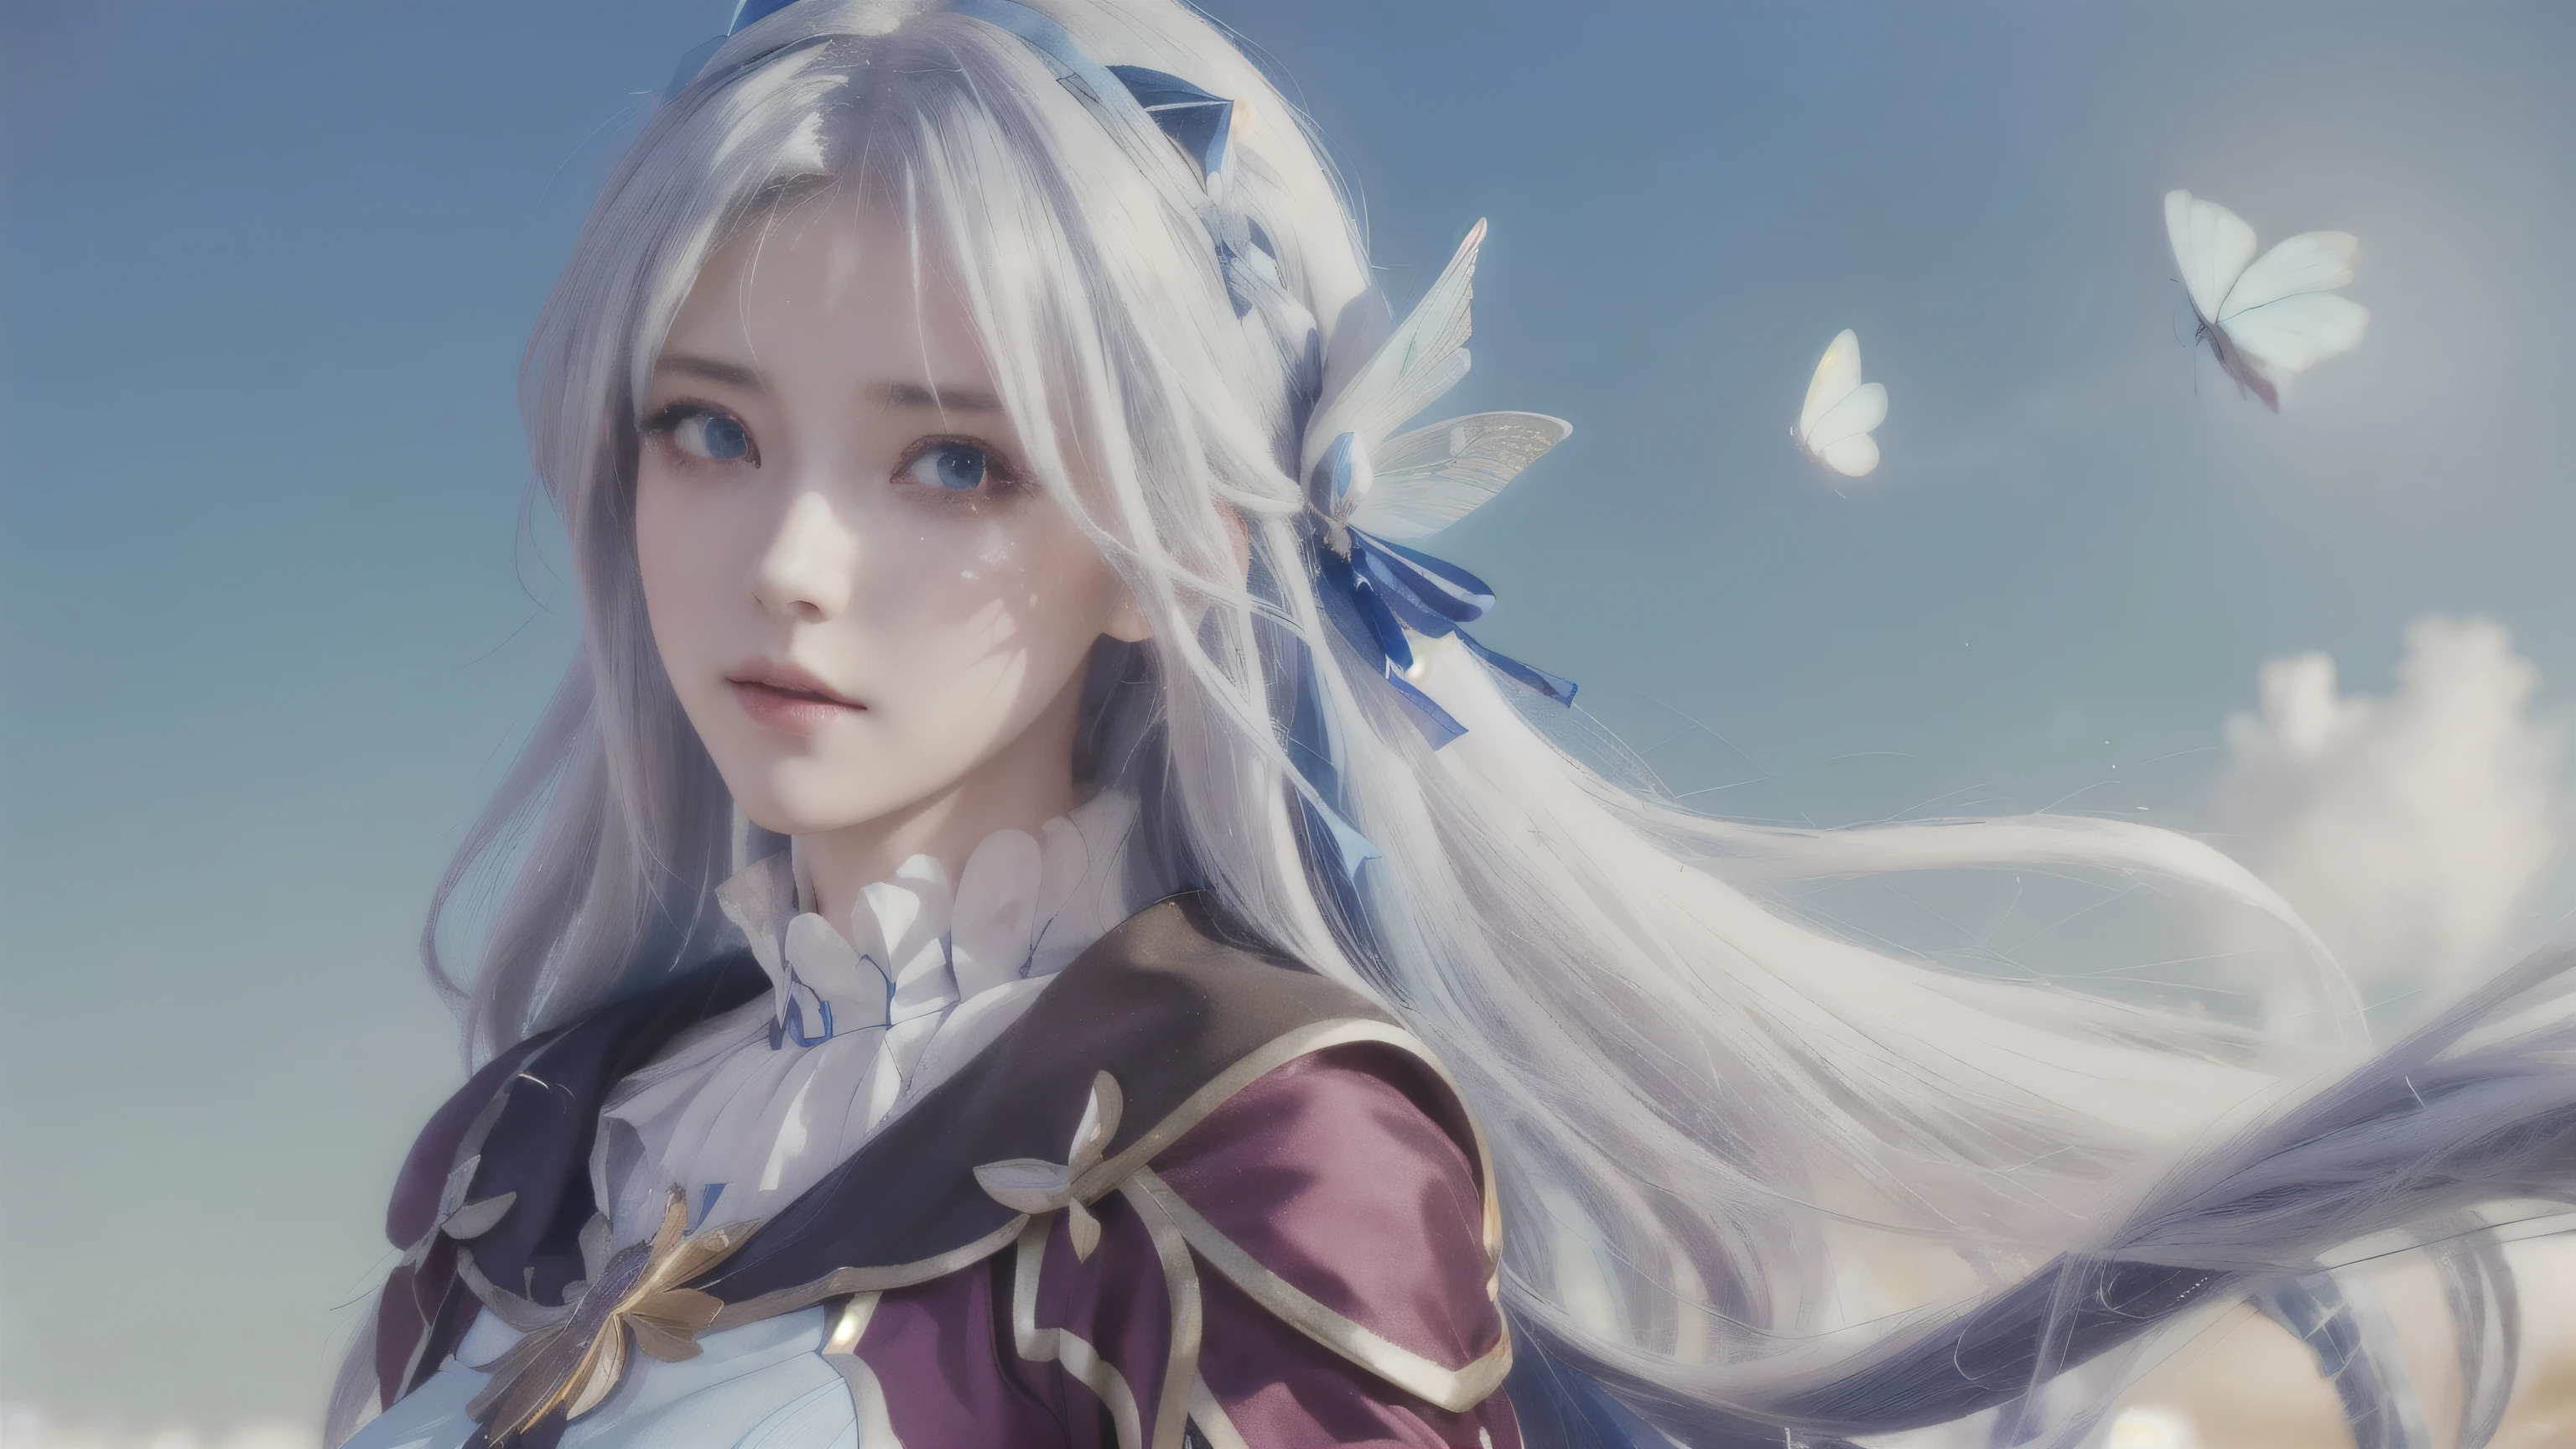 anime girl with long white hair and blue eyes and a butterfly in her hair, 8k high quality detailed art, portrait knights of zodiac girl, detailed digital anime art, 2. 5 d cgi anime fantasy artwork, white haired deity, anime style 4 k, digital anime art, beautiful anime portrait, smooth anime cg art, beautiful fantasy anime, beautiful anime girl